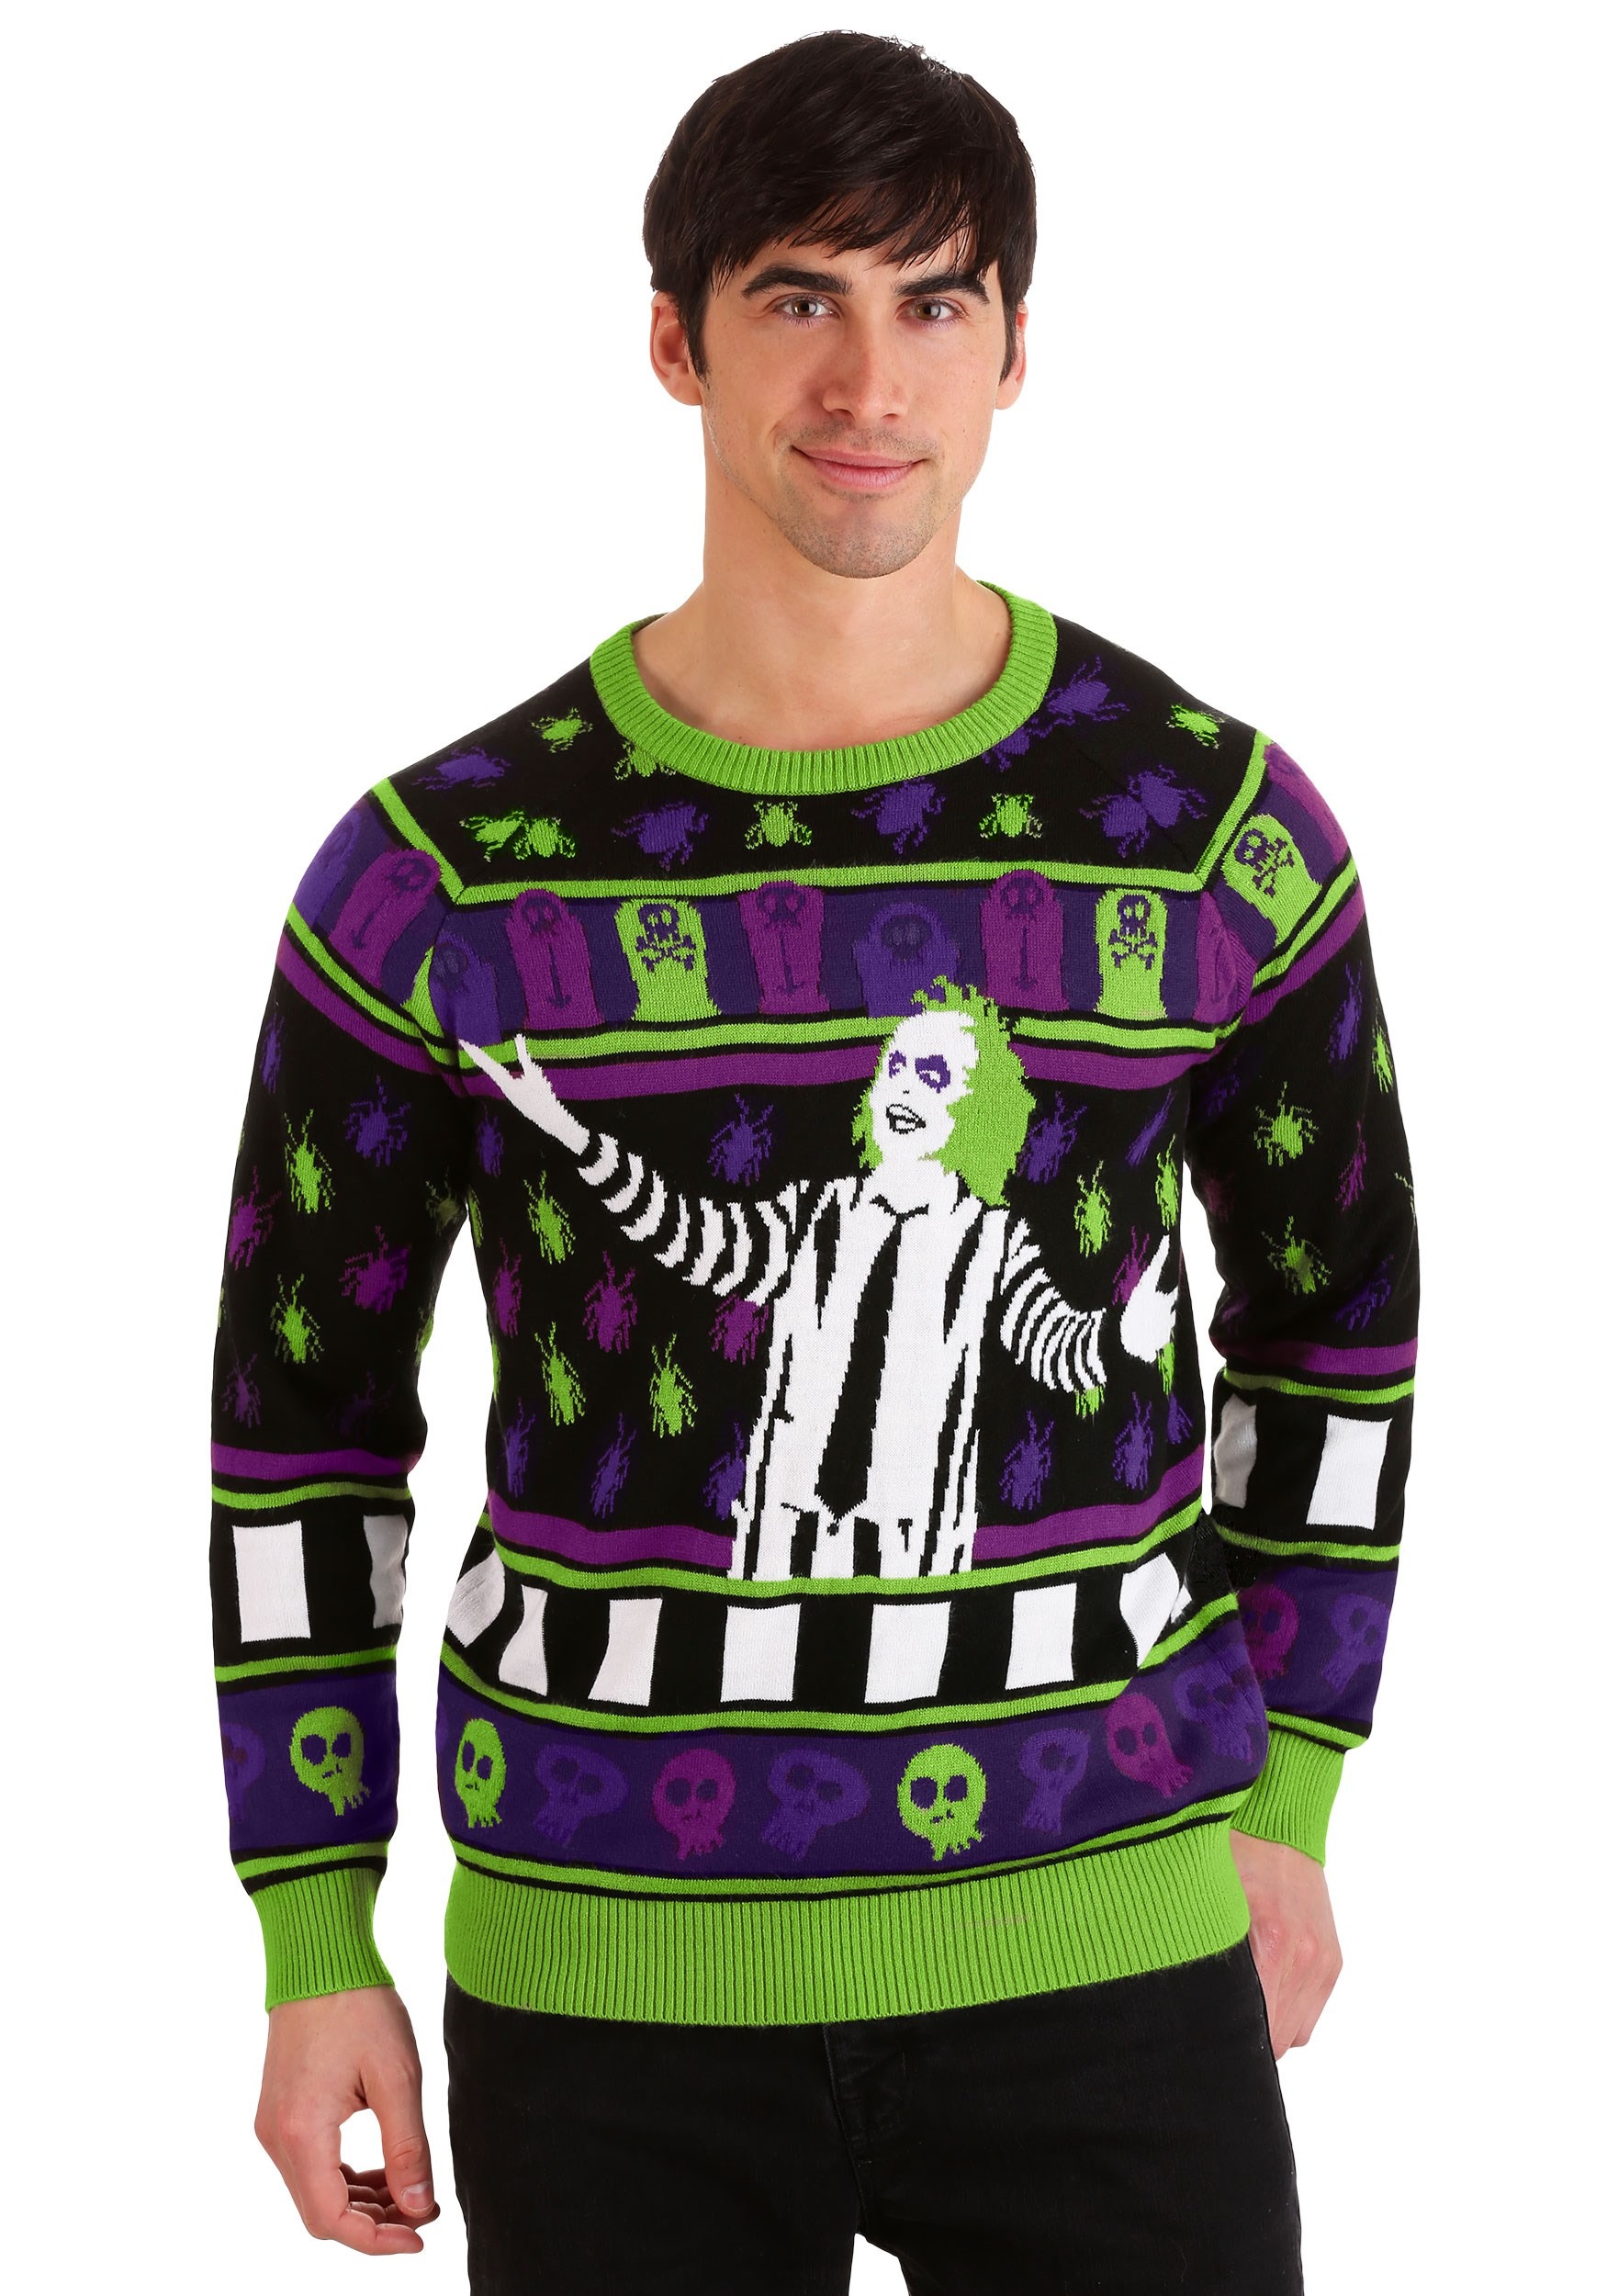 Beetlejuice Its Showtime! Ugly Halloween Sweater for Adults